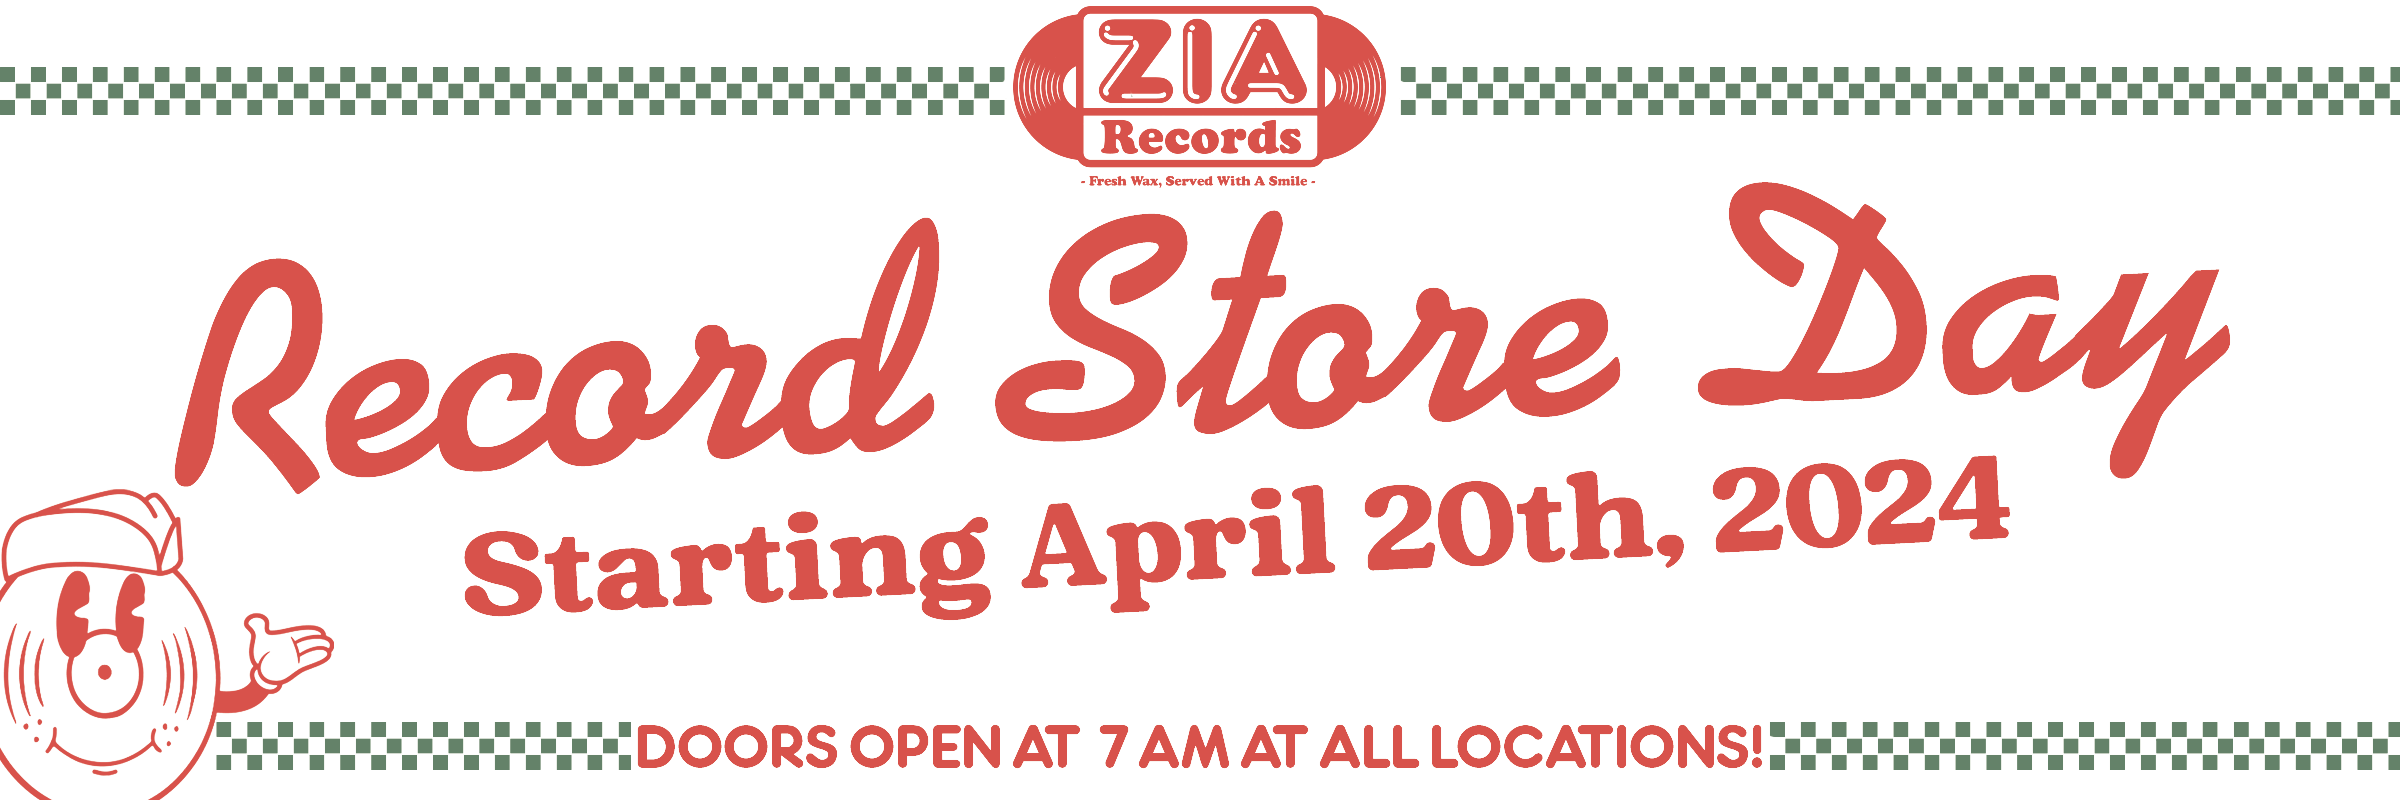 Record Store Day 2024 at Zia Records